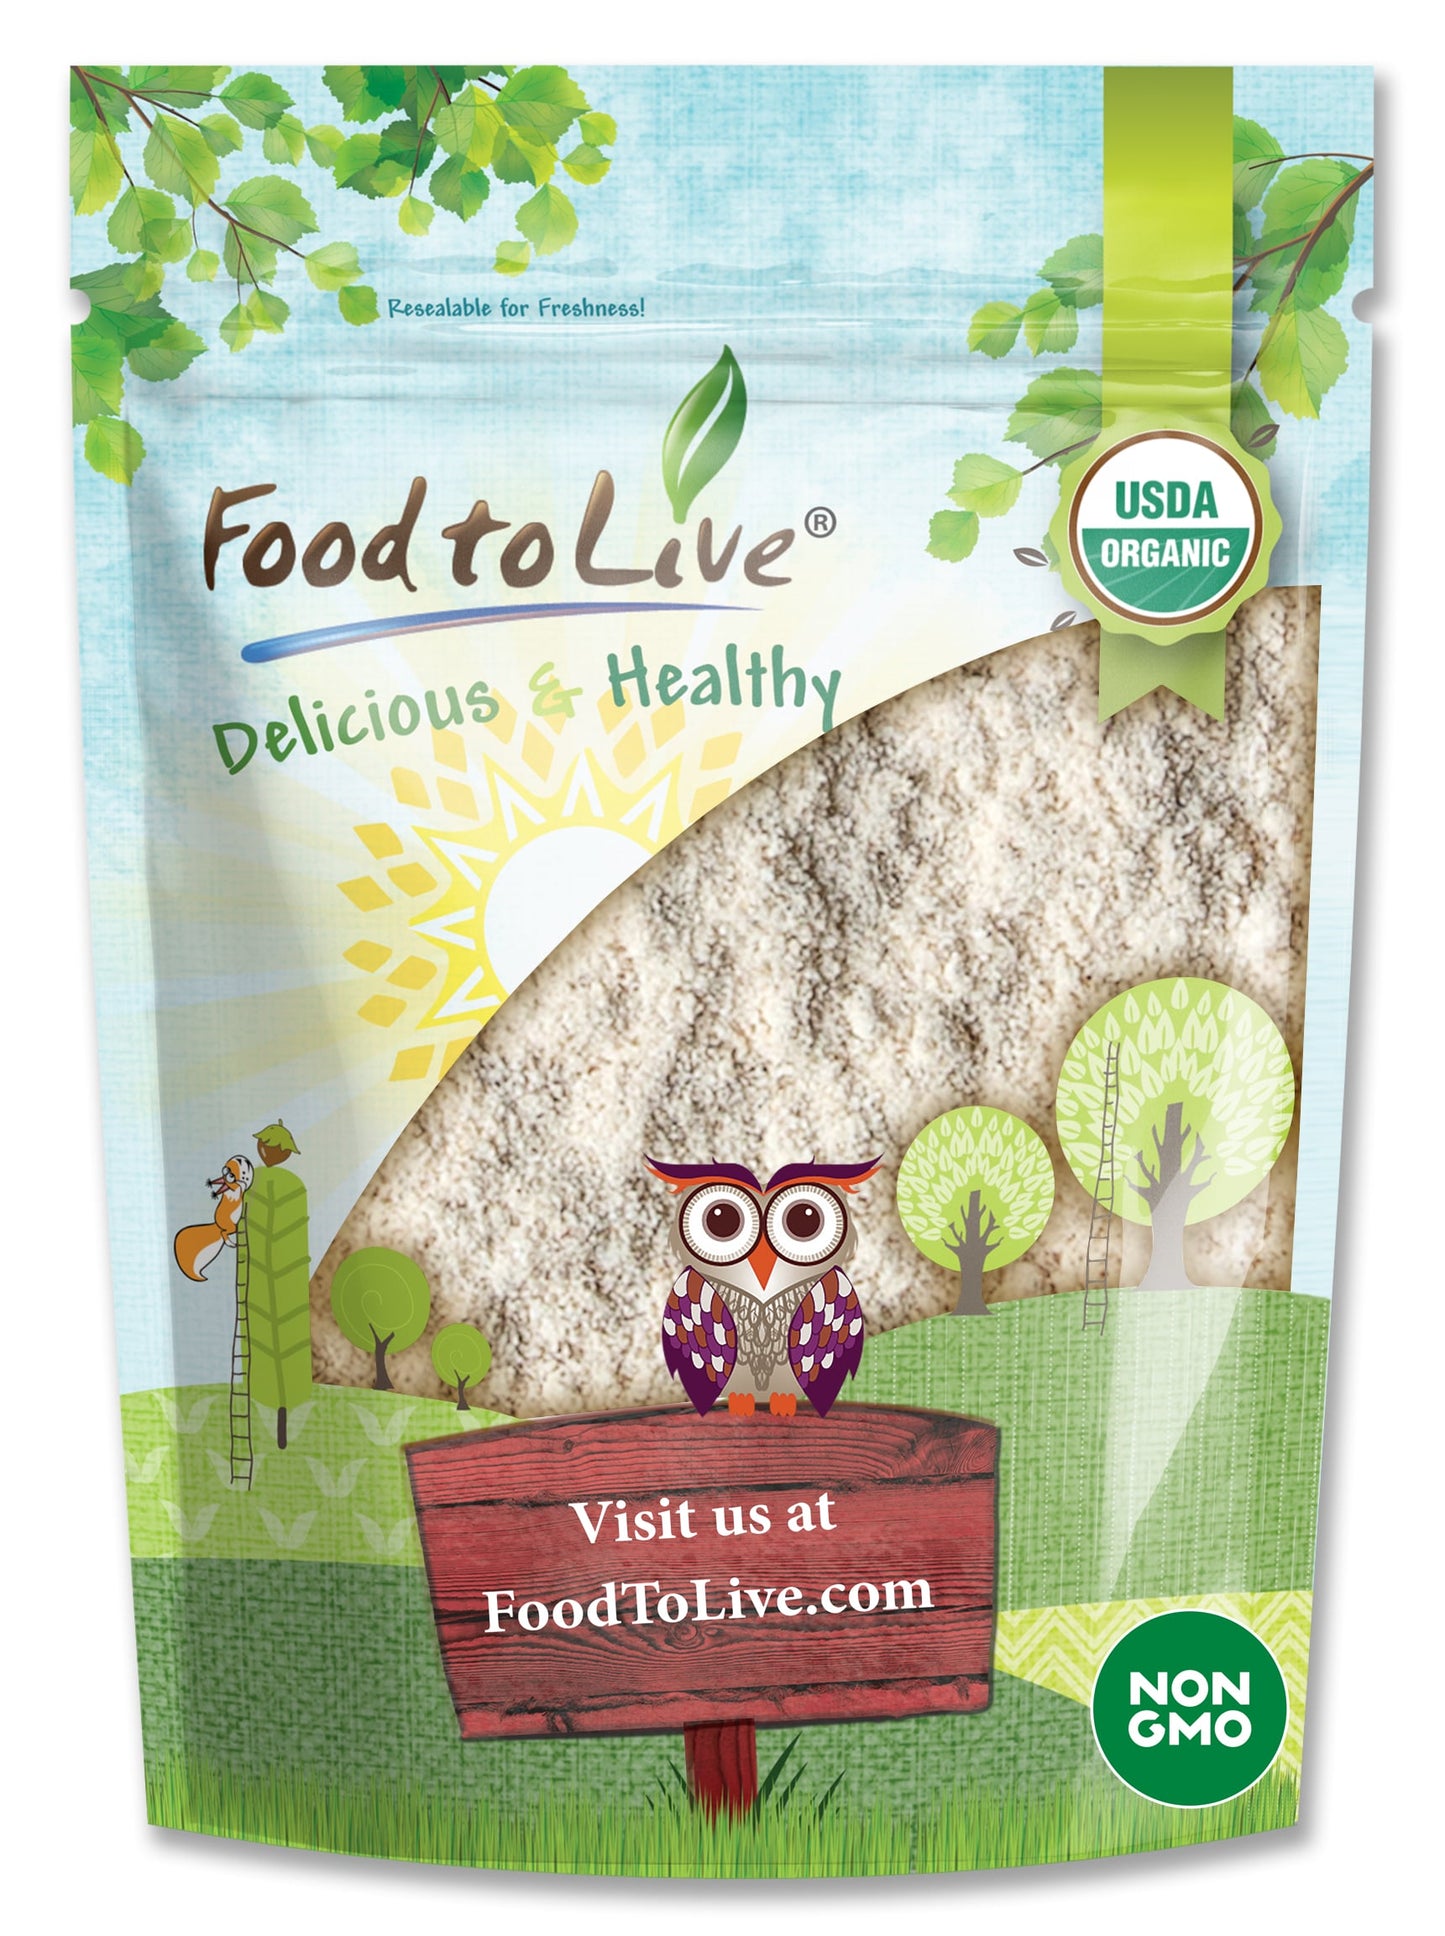 Organic Amaranth Flour - Non-GMO, Fine Ground from Whole Grains, Vegan Meal, Kosher, Bulk Powder, High in Dietary Fiber - by Food to Live